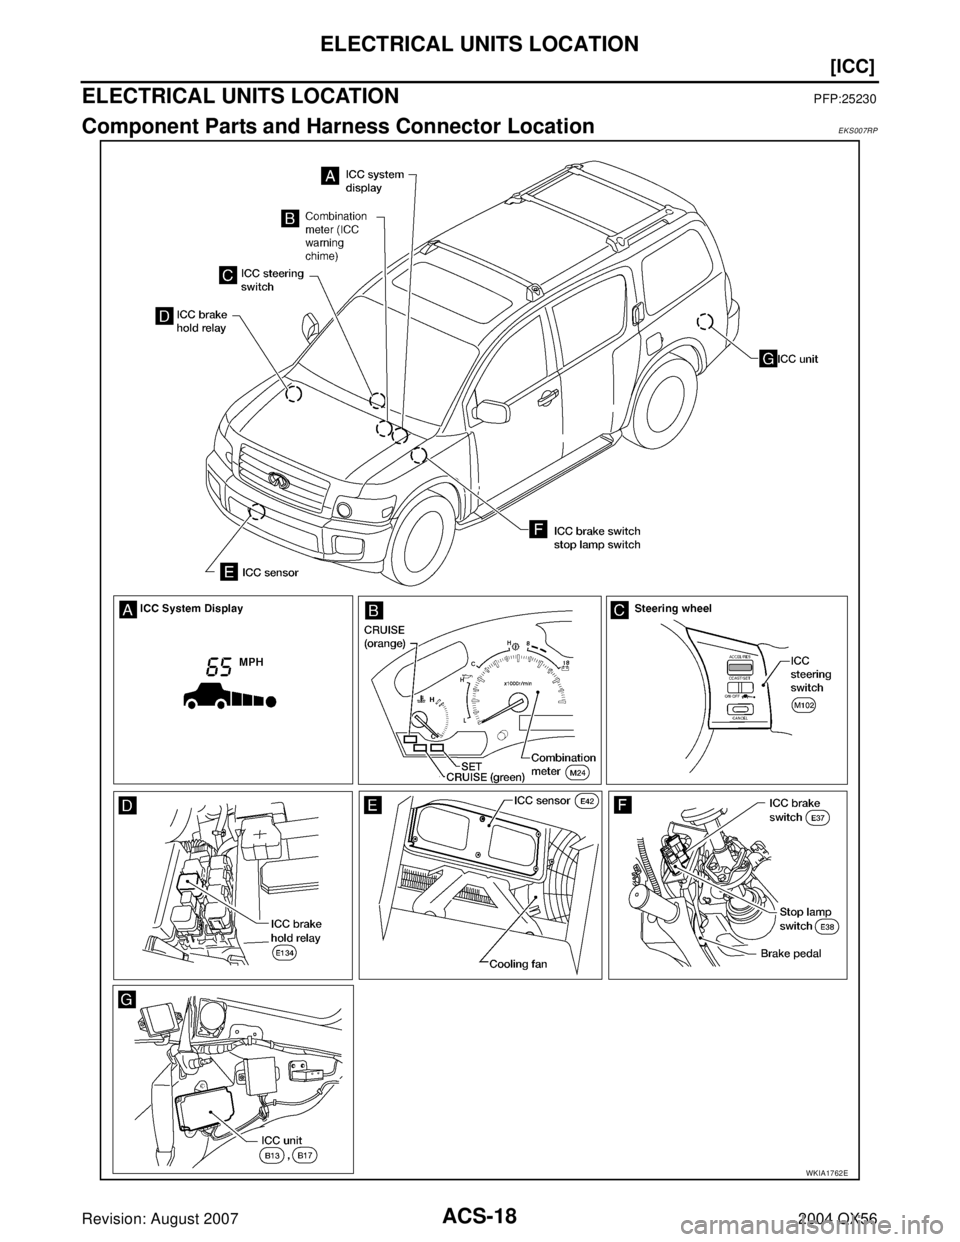 INFINITI QX56 2004  Factory Service Manual ACS-18
[ICC]
ELECTRICAL UNITS LOCATION
Revision: August 20072004 QX56
ELECTRICAL UNITS LOCATIONPFP:25230
Component Parts and Harness Connector LocationEKS007RP
WKIA1762E 